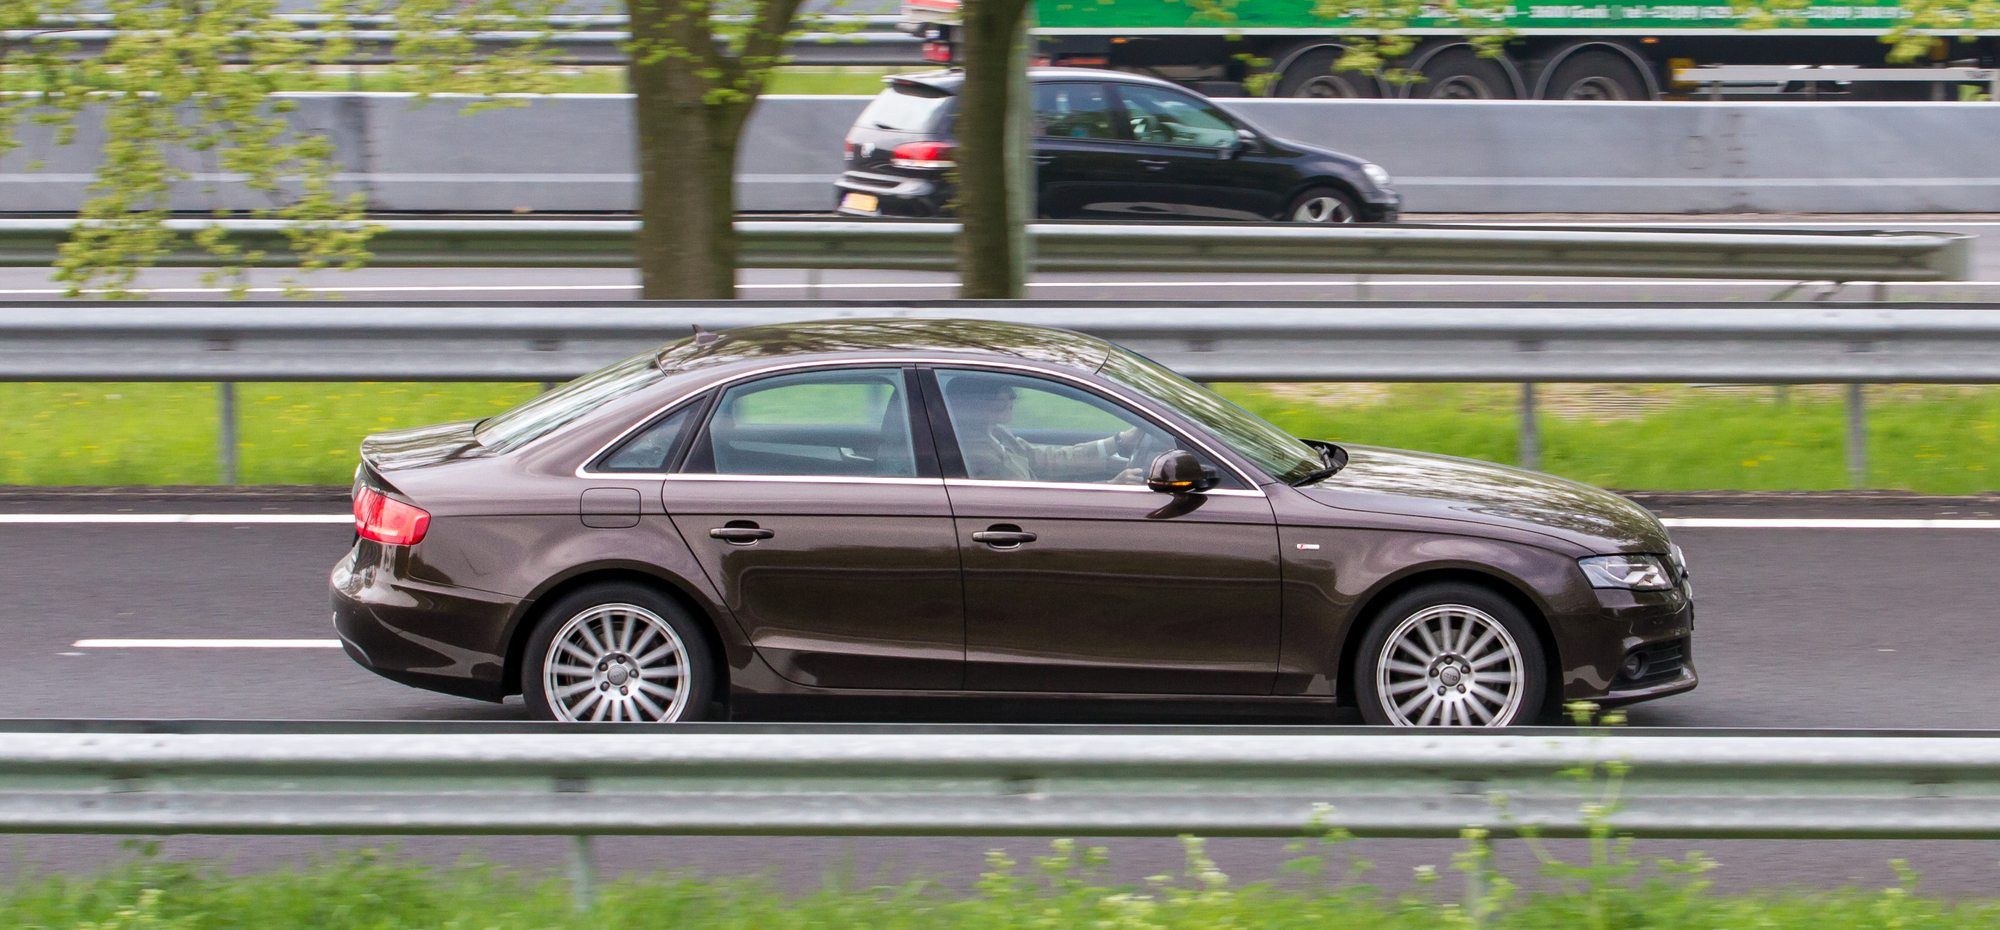 Audi Class Action Lawsuit Claims Braking and Steering Delays Top